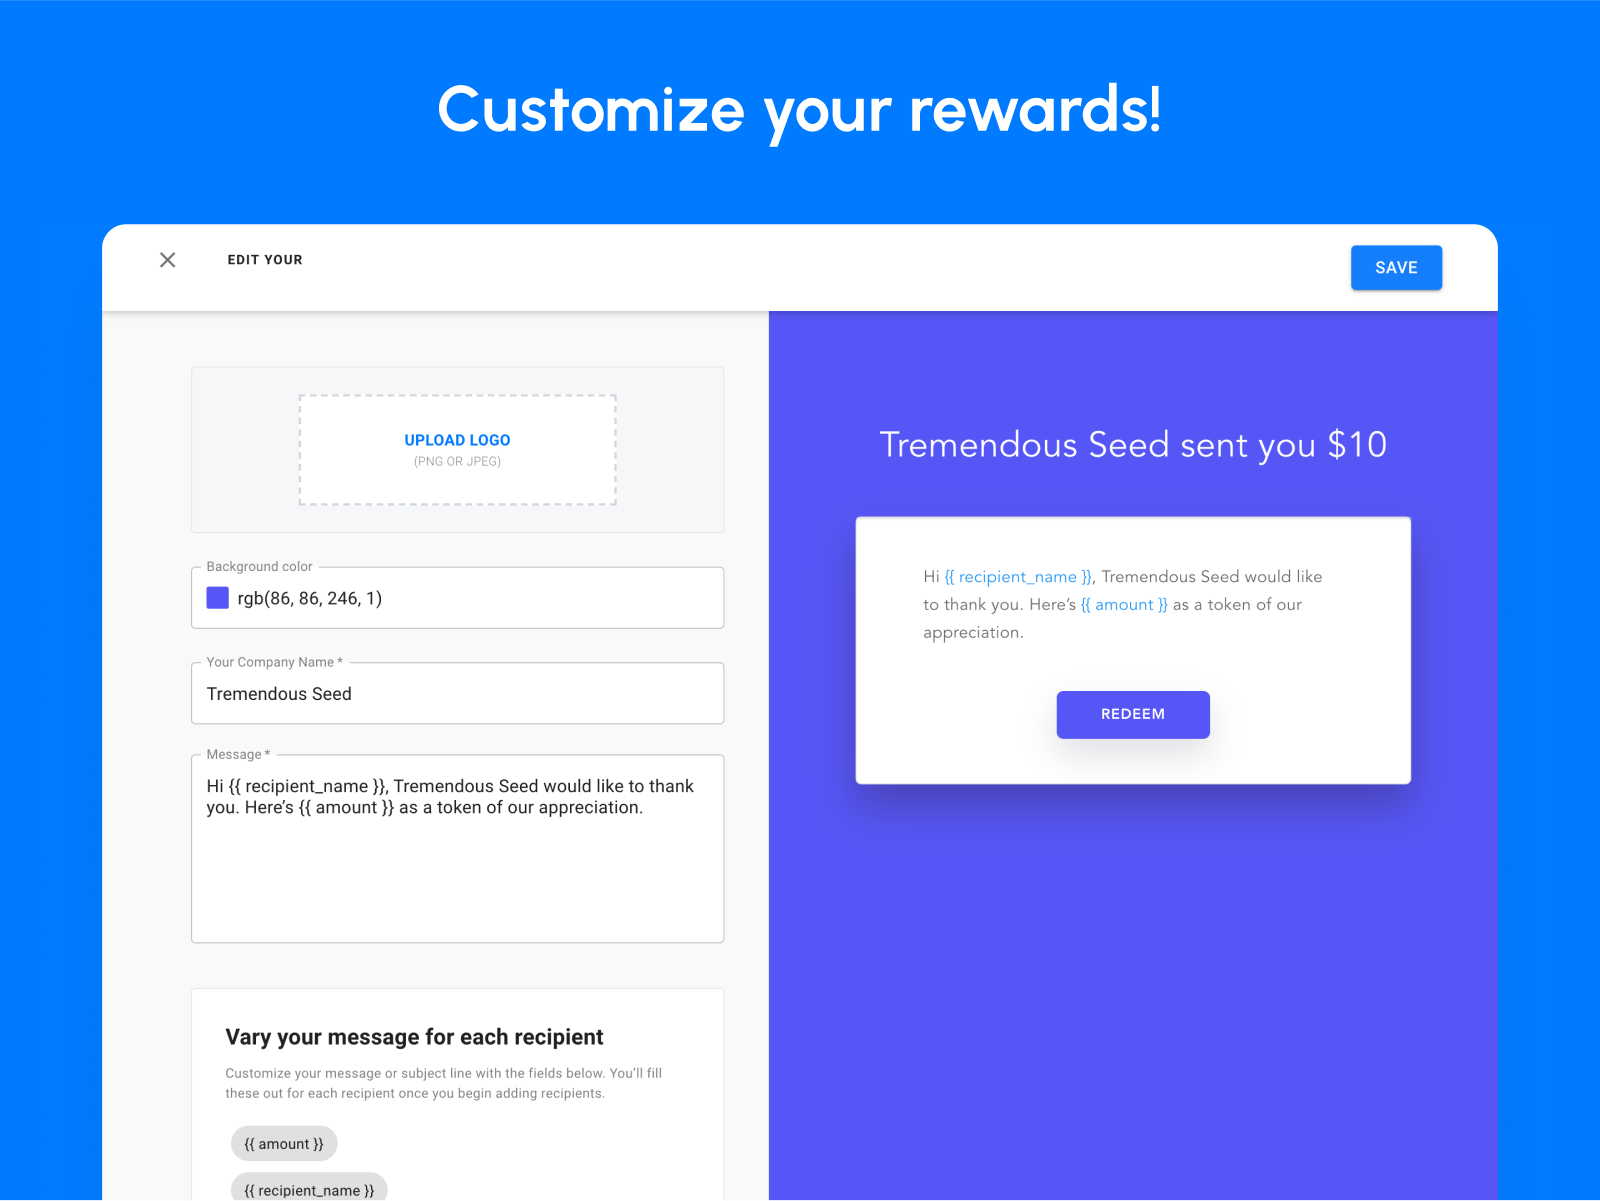 Personalize the redemption experience with campaign templates.